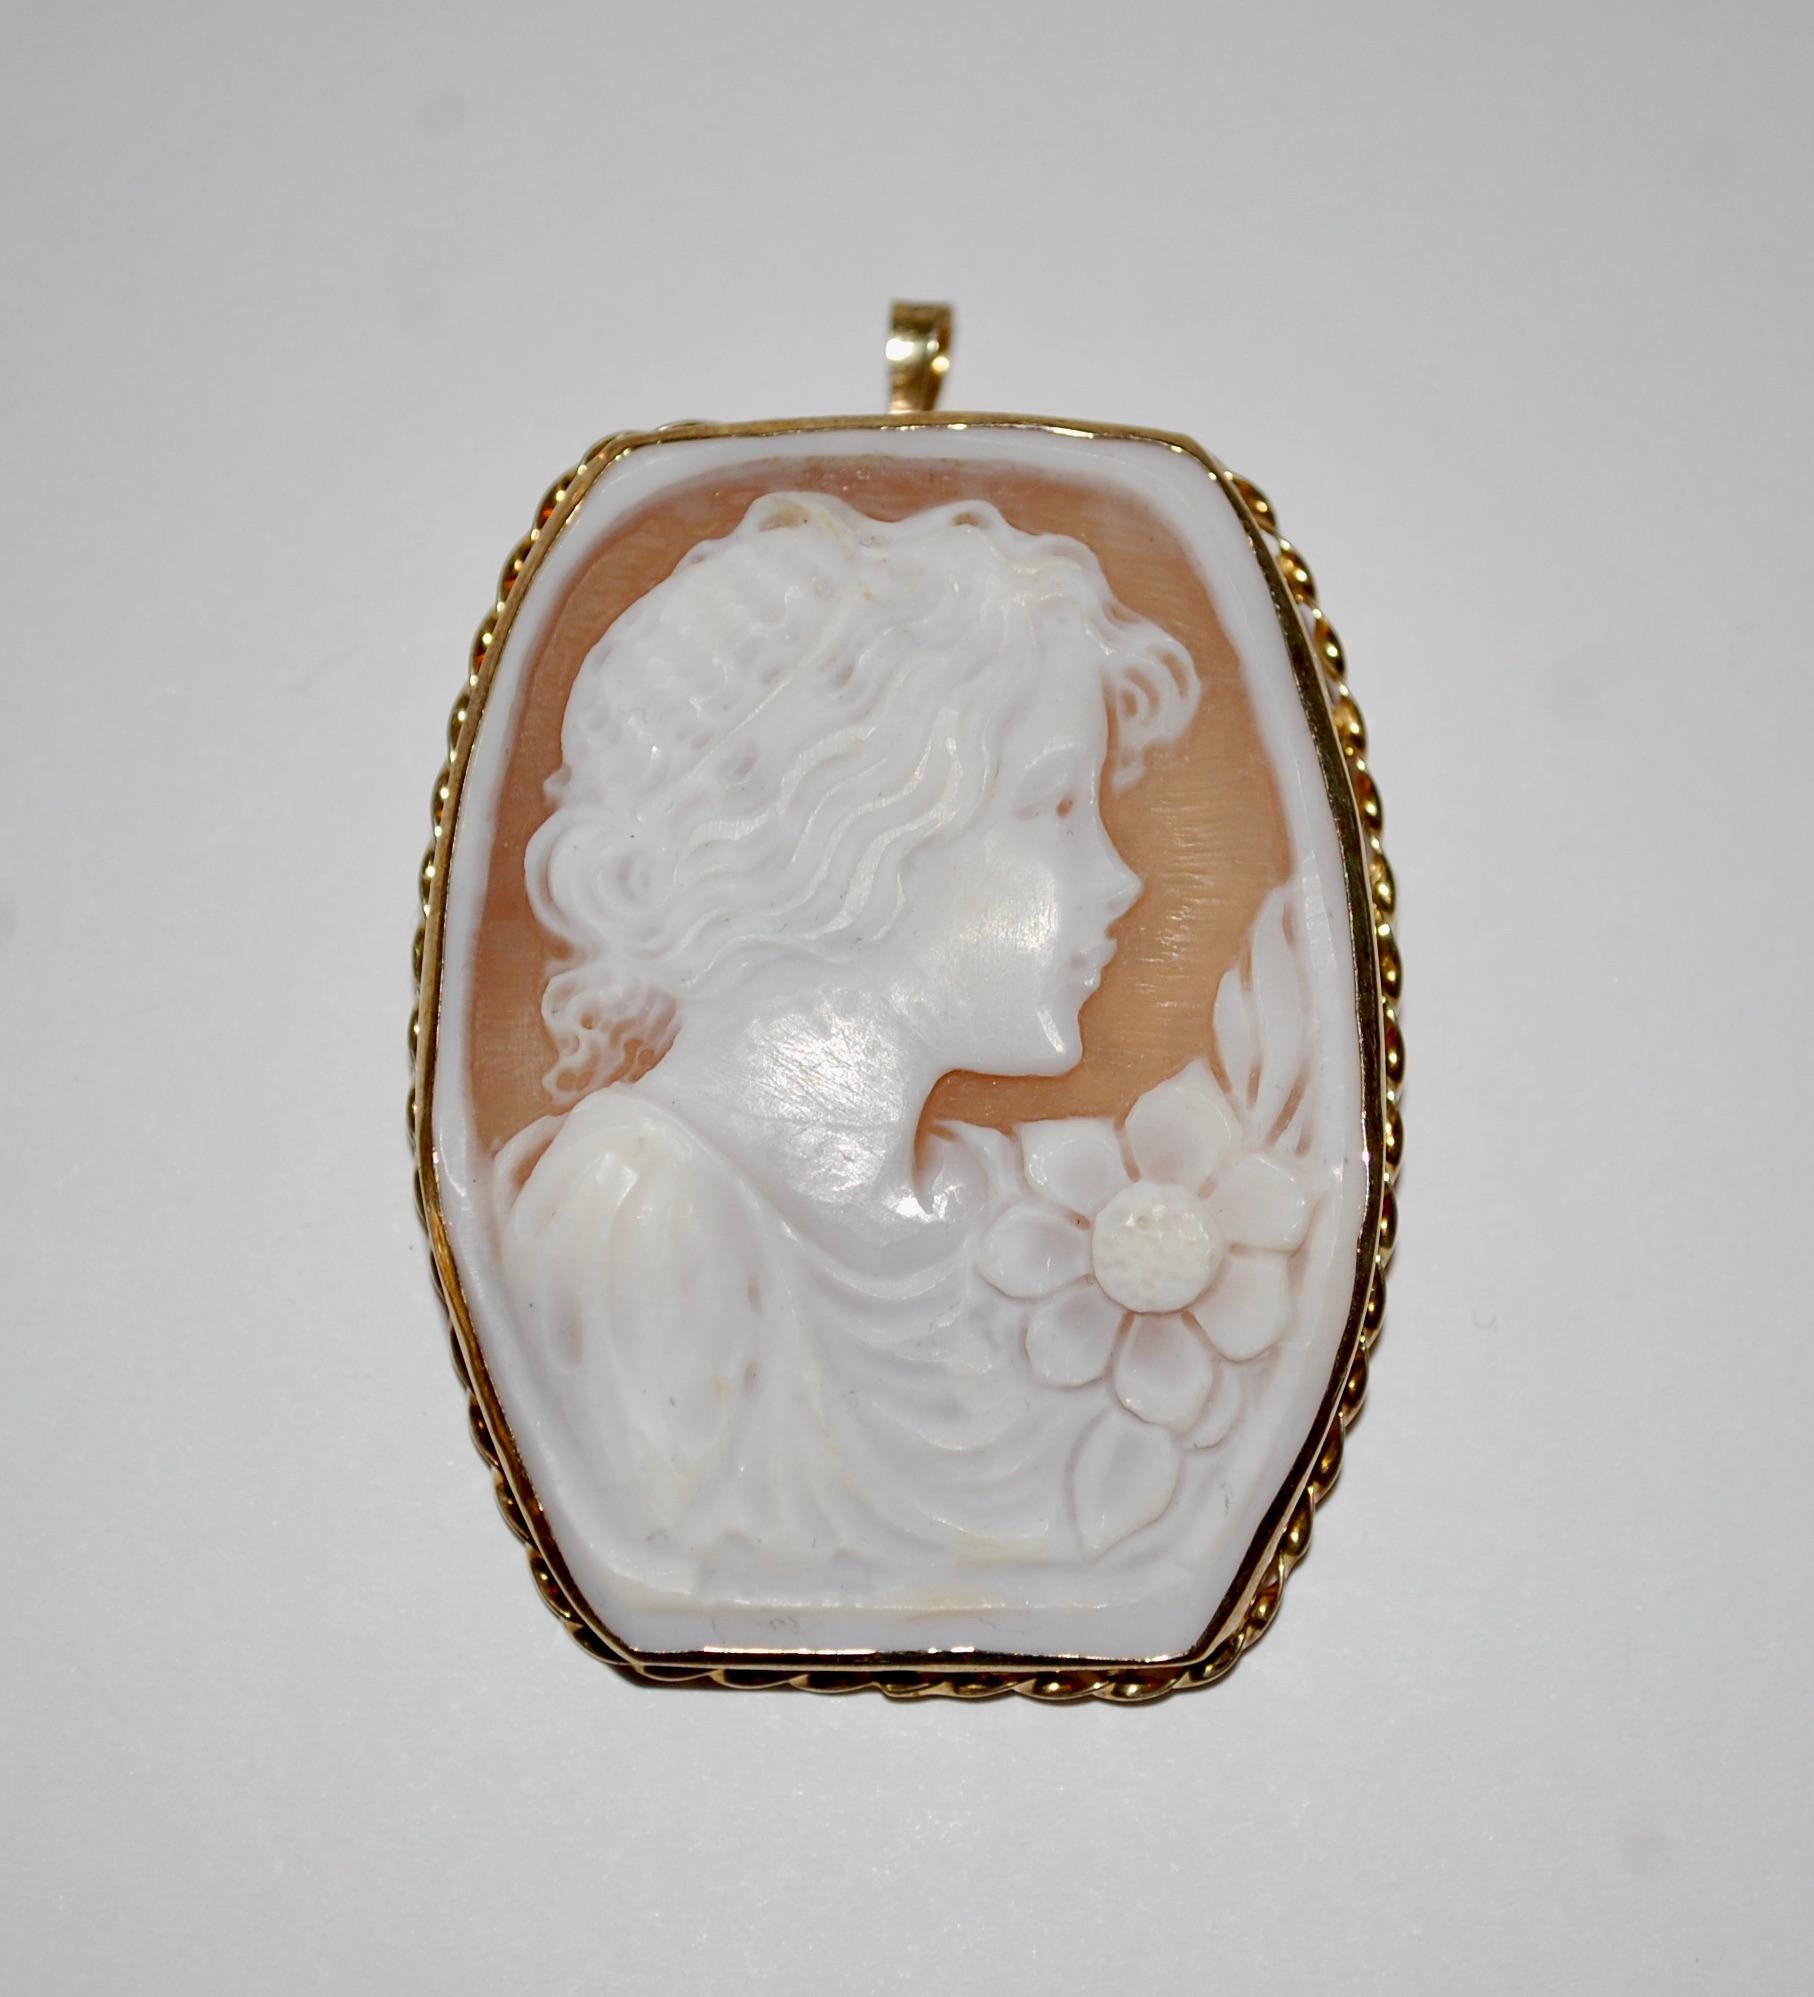 Vintage Large Cameo Pendent or Brooch.
Hand crafted with beautiful details  of a young lady with a flower. The almost squarish shell in light pink and white color set in gold plated 925 sterling silver, marked 925. A wonderful quality to showcase